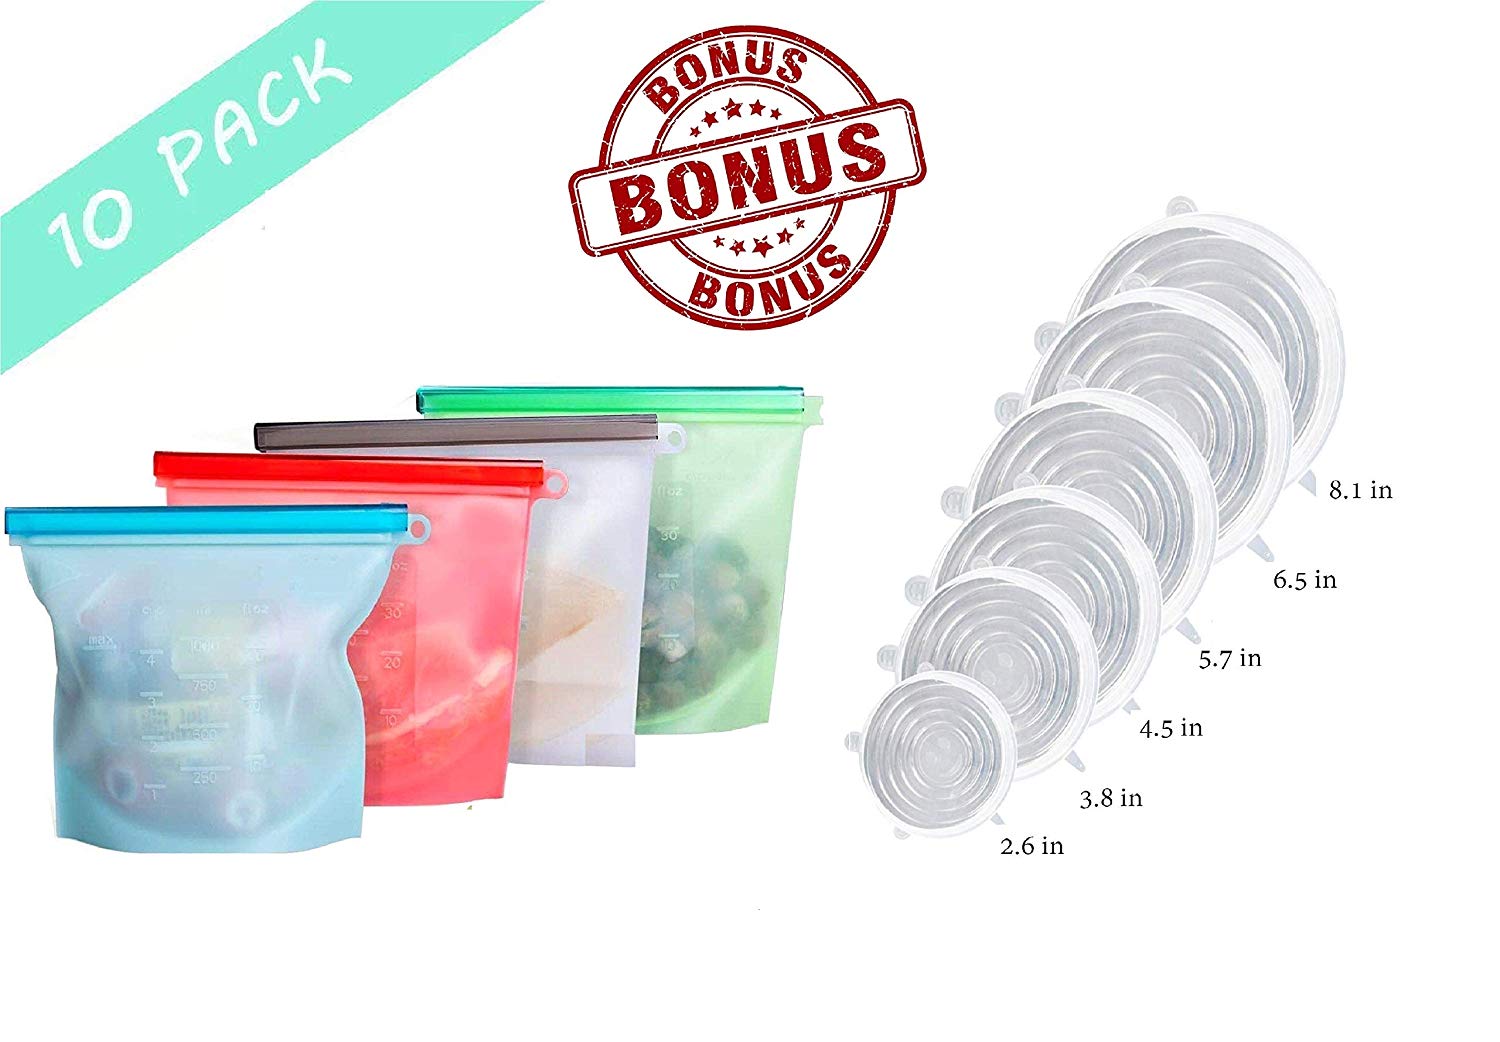 Ziploc 300-Pack Quart Plastic Reusable Food Bag in the Food Storage  Containers department at